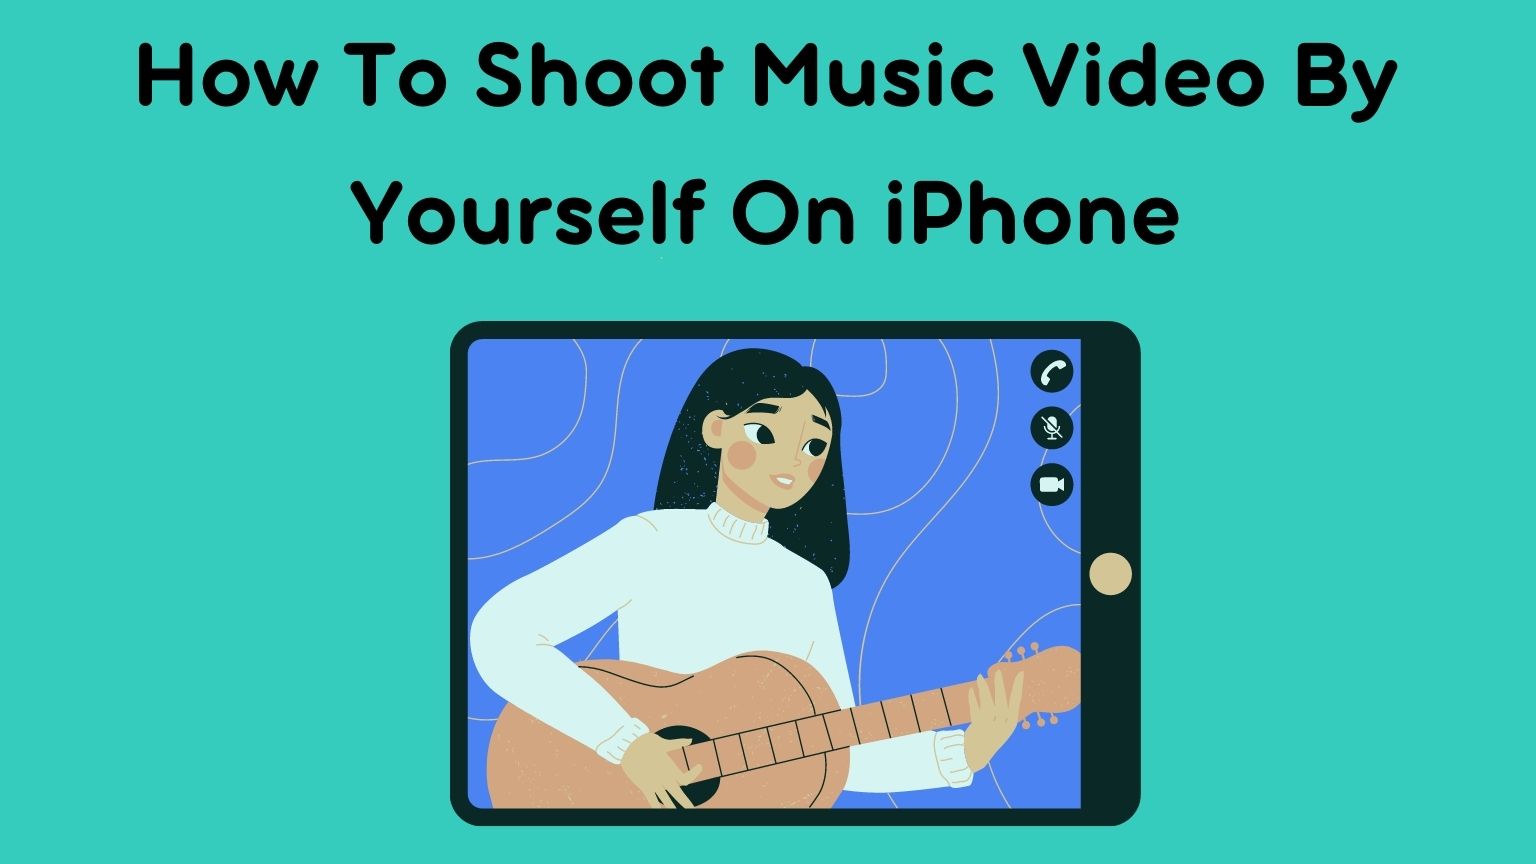 How To Shoot A Music Video By Yourself On iPhone